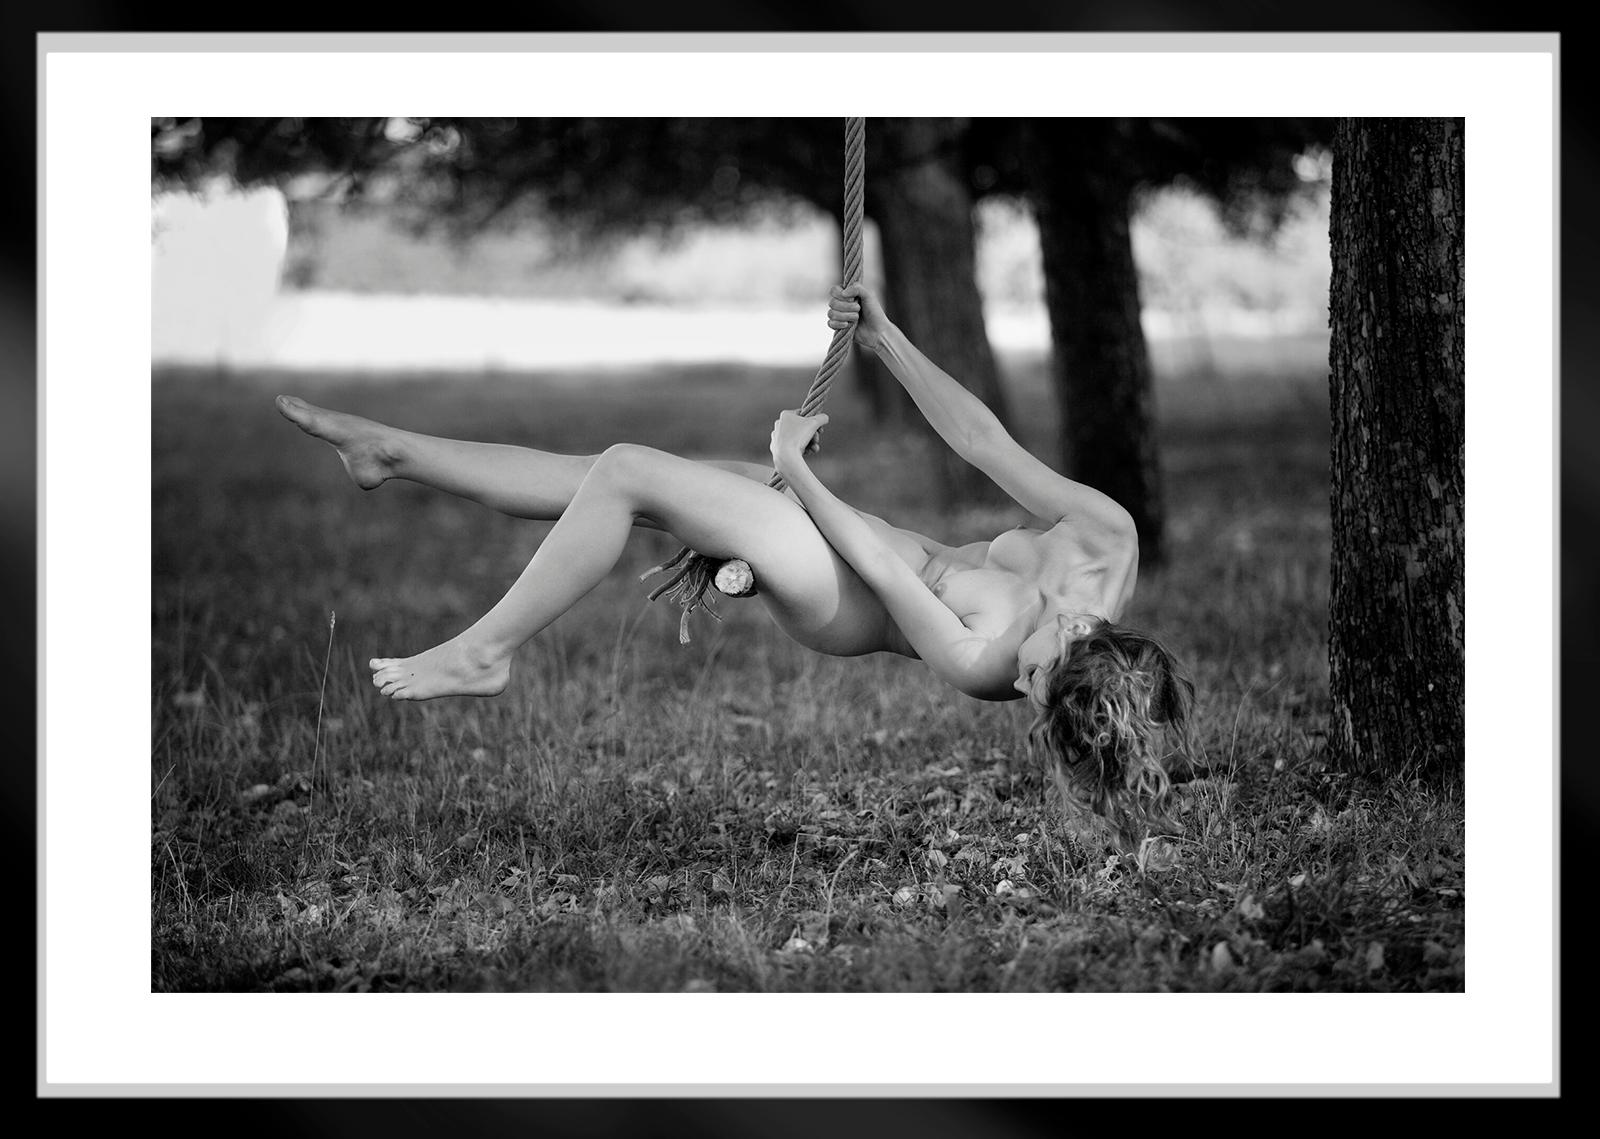 Swing -Signed limited edition fine art print, Black and white photo, Sensual, Model - Contemporary Photograph by Ian Sanderson